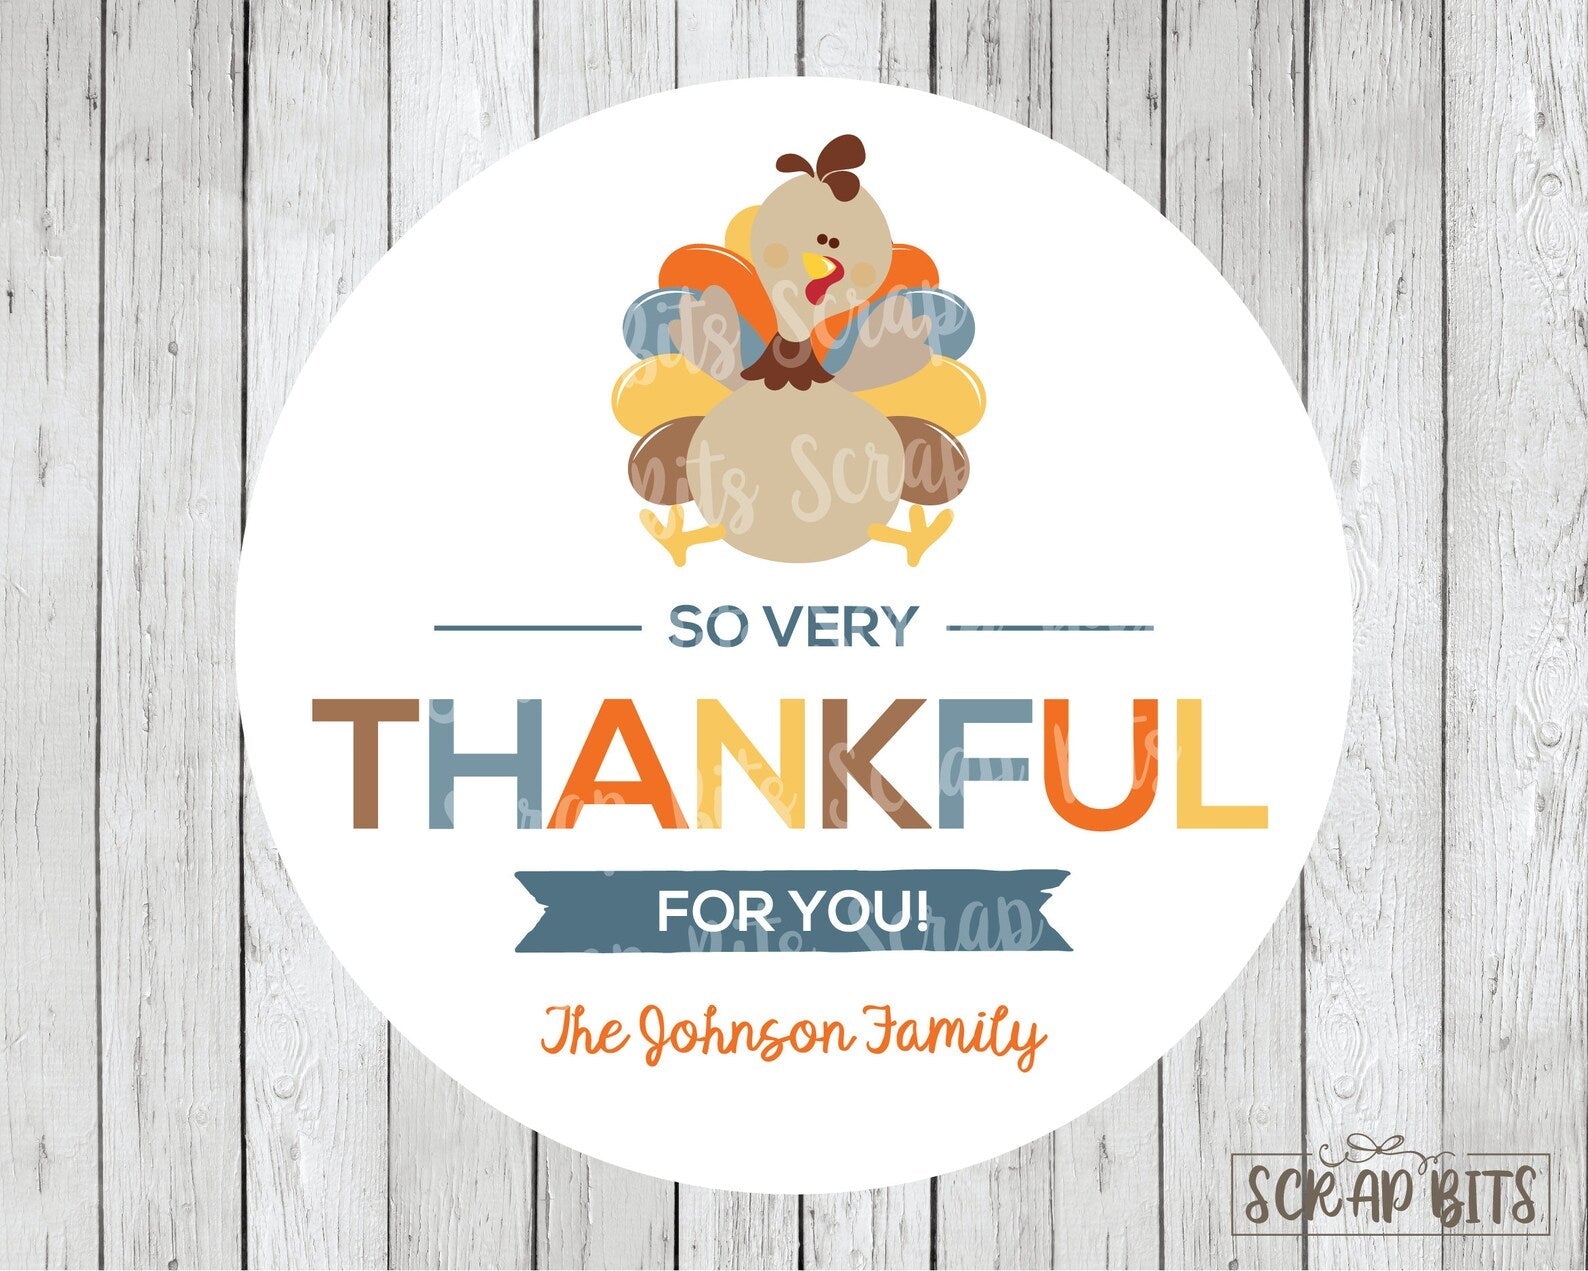 So Very Thankful Turkey Stickers . Thanksgiving Stickers or Tags - Scrap Bits